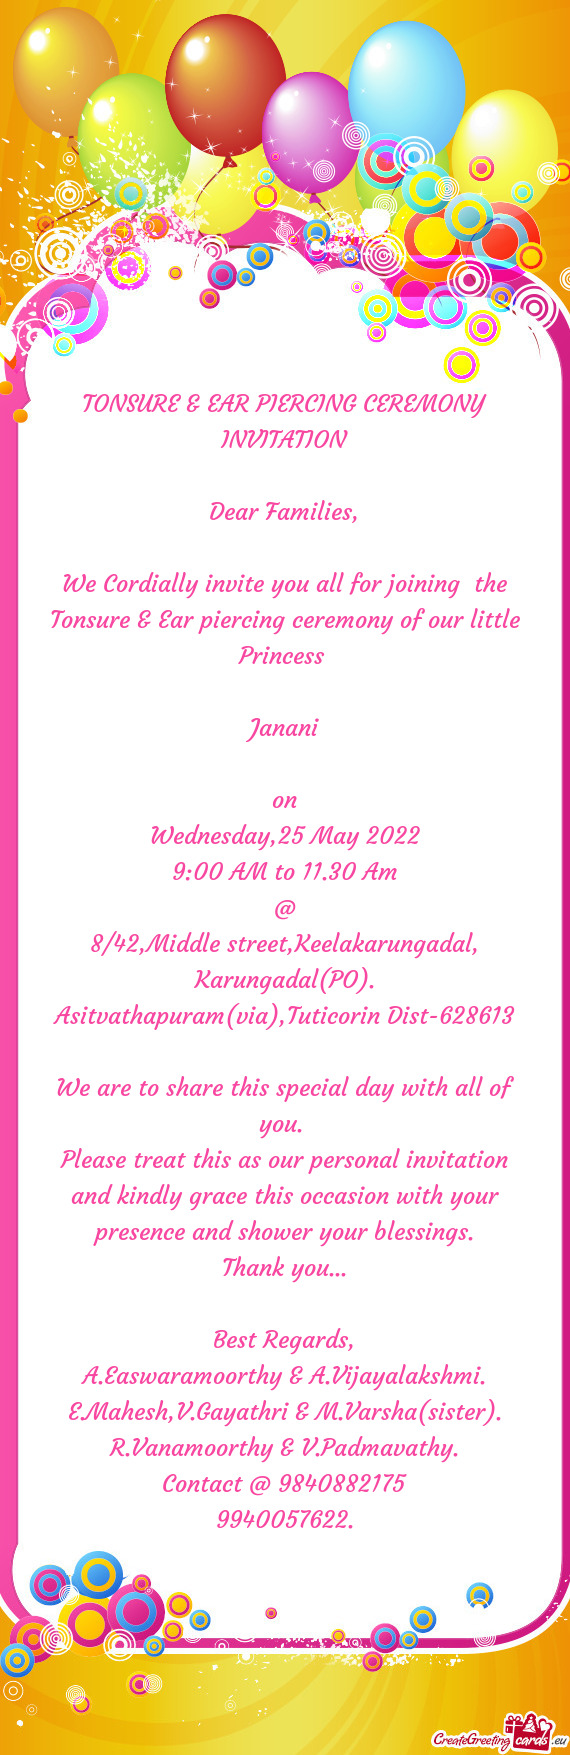 We Cordially invite you all for joining the Tonsure & Ear piercing ceremony of our little Princess